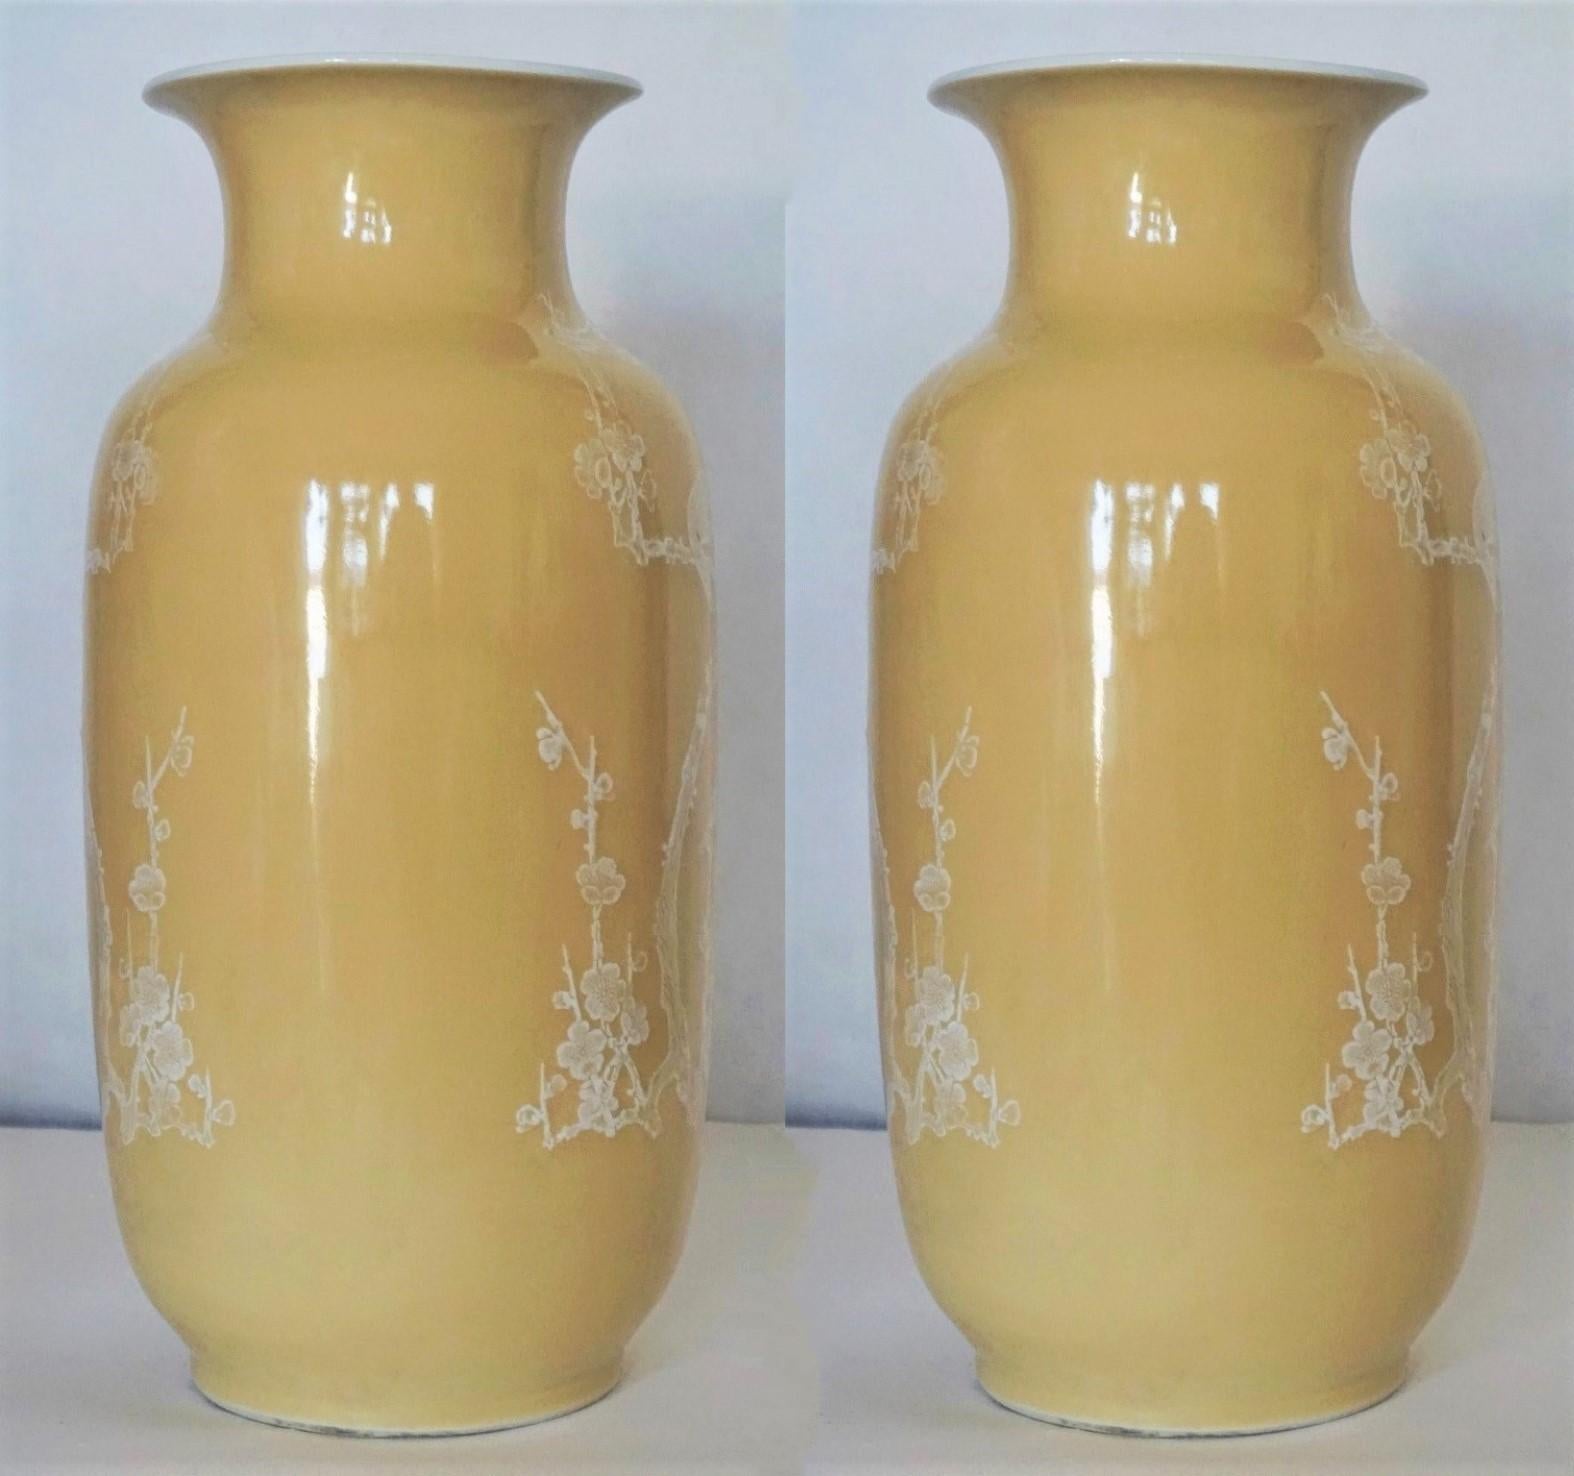 A pair of large, fine Chinese porcelain yellow-ground vases decorated with hand painted birds and floral motifs on both sides, China, early 20th century. Each vase marked at the bottom.
Condition: Both vases in fine original condition, some wear, no